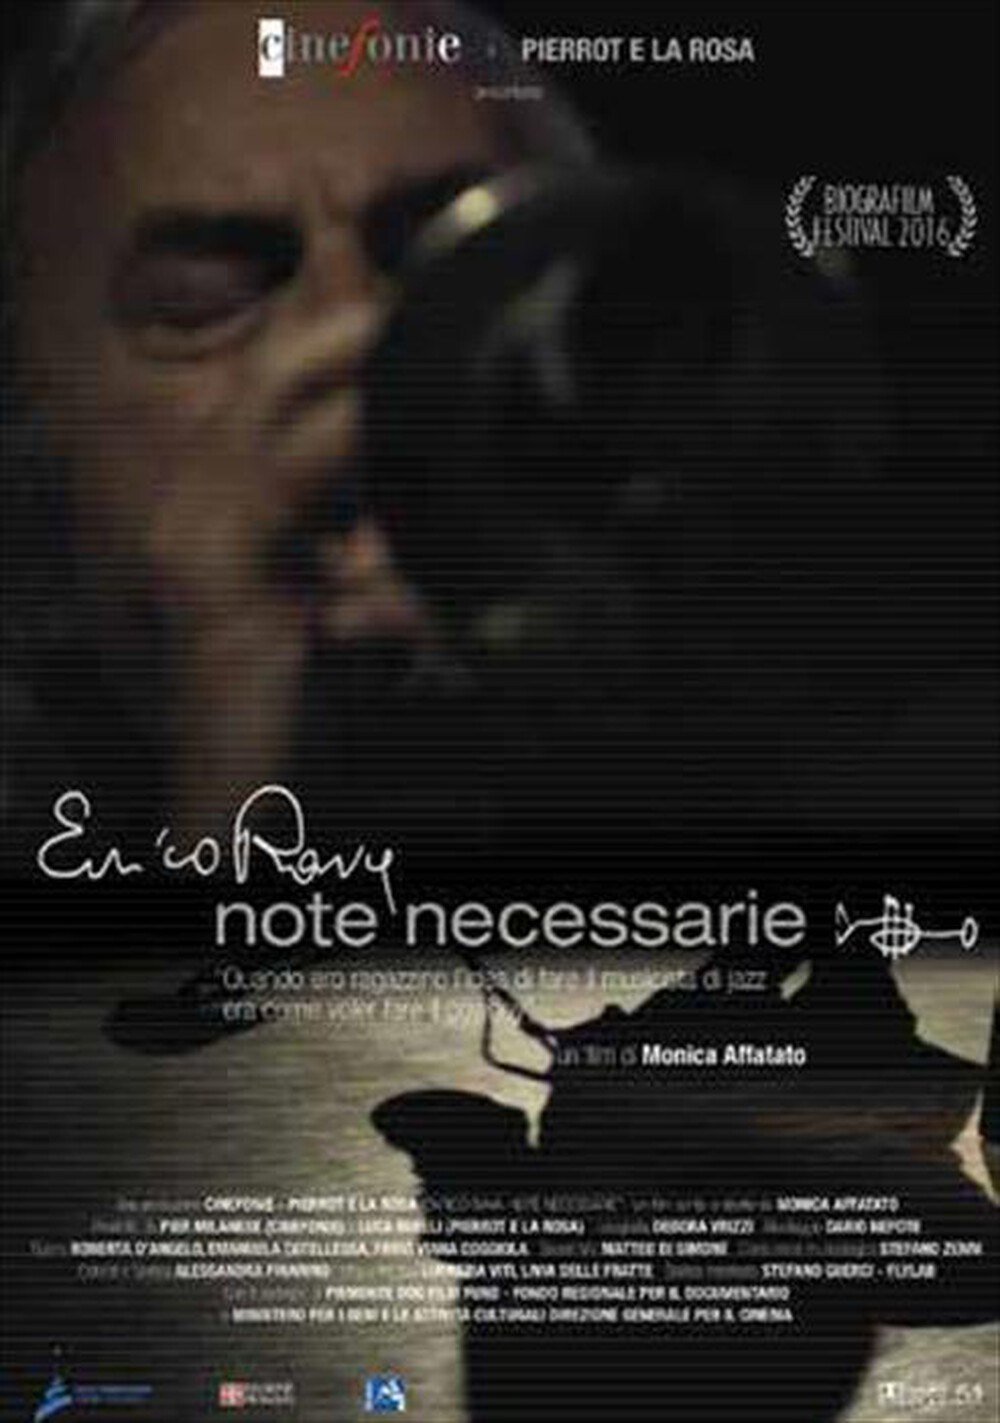 "Wanted - Enrico Rava - Note Necessarie"